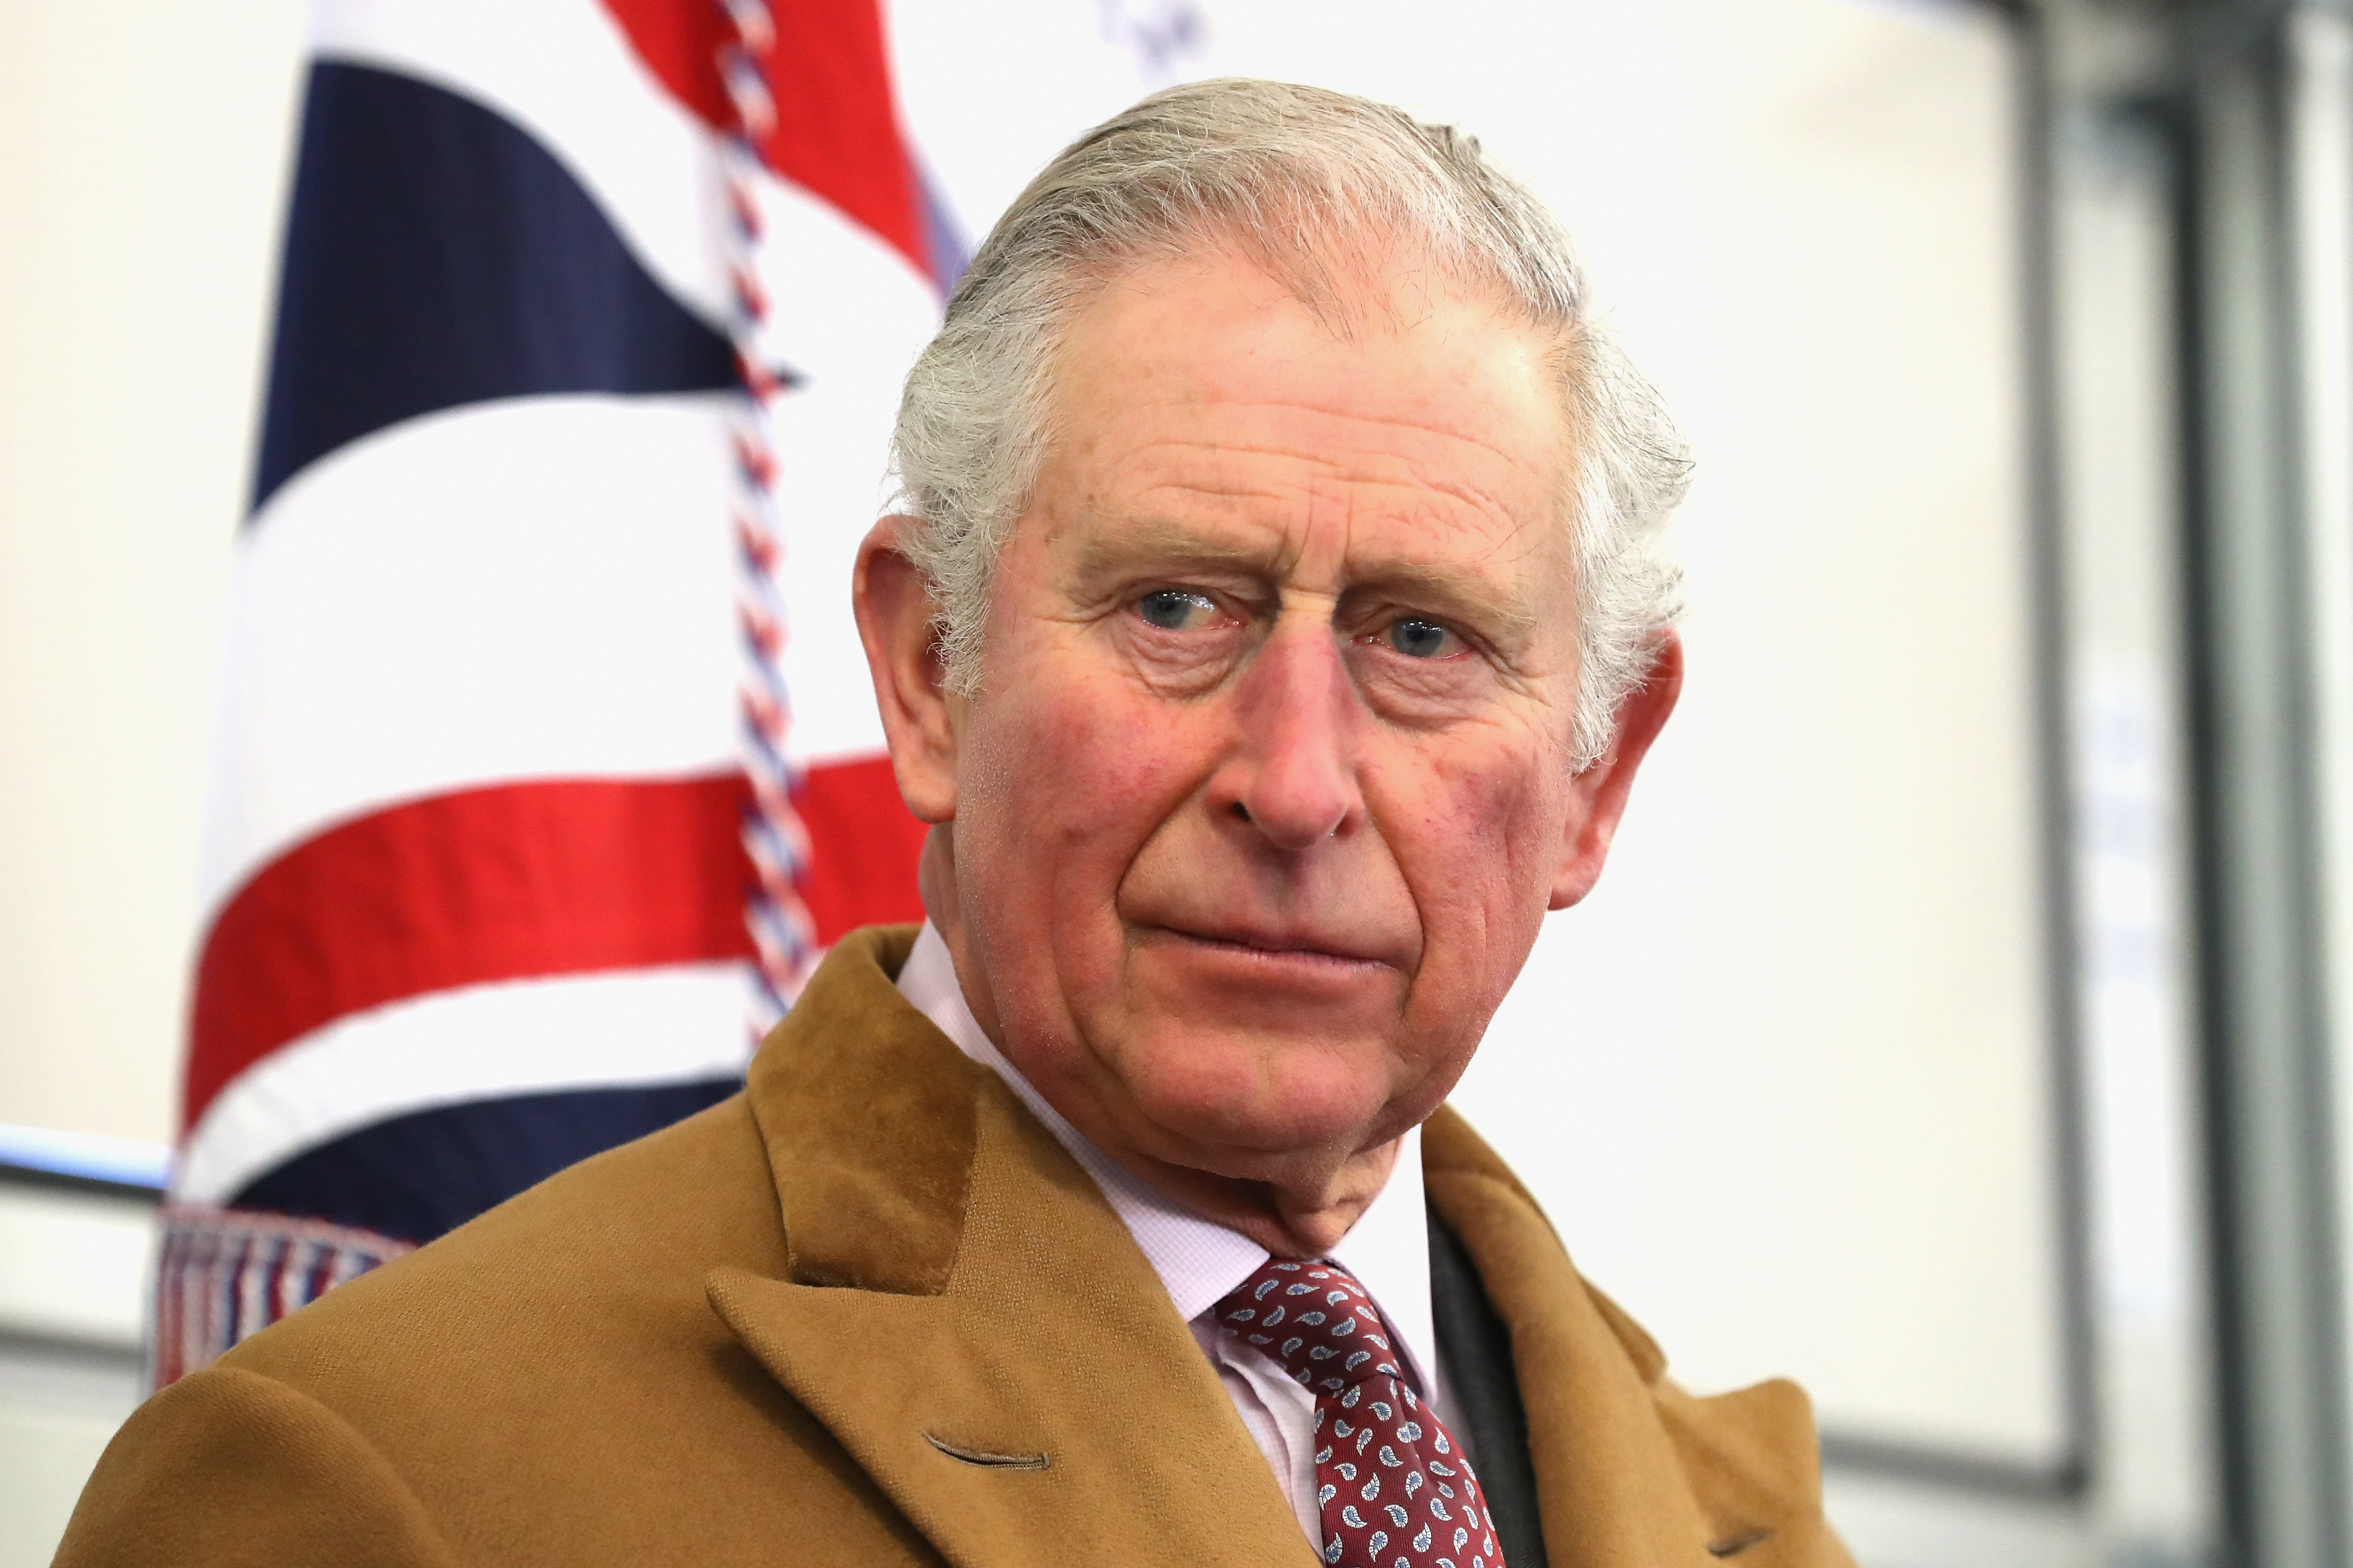 Prince Charles, Prince of Wales, visits the new Emergency Service Station at Barnard Castle in Durham, England on February 15, 2018. | Source: Getty Images